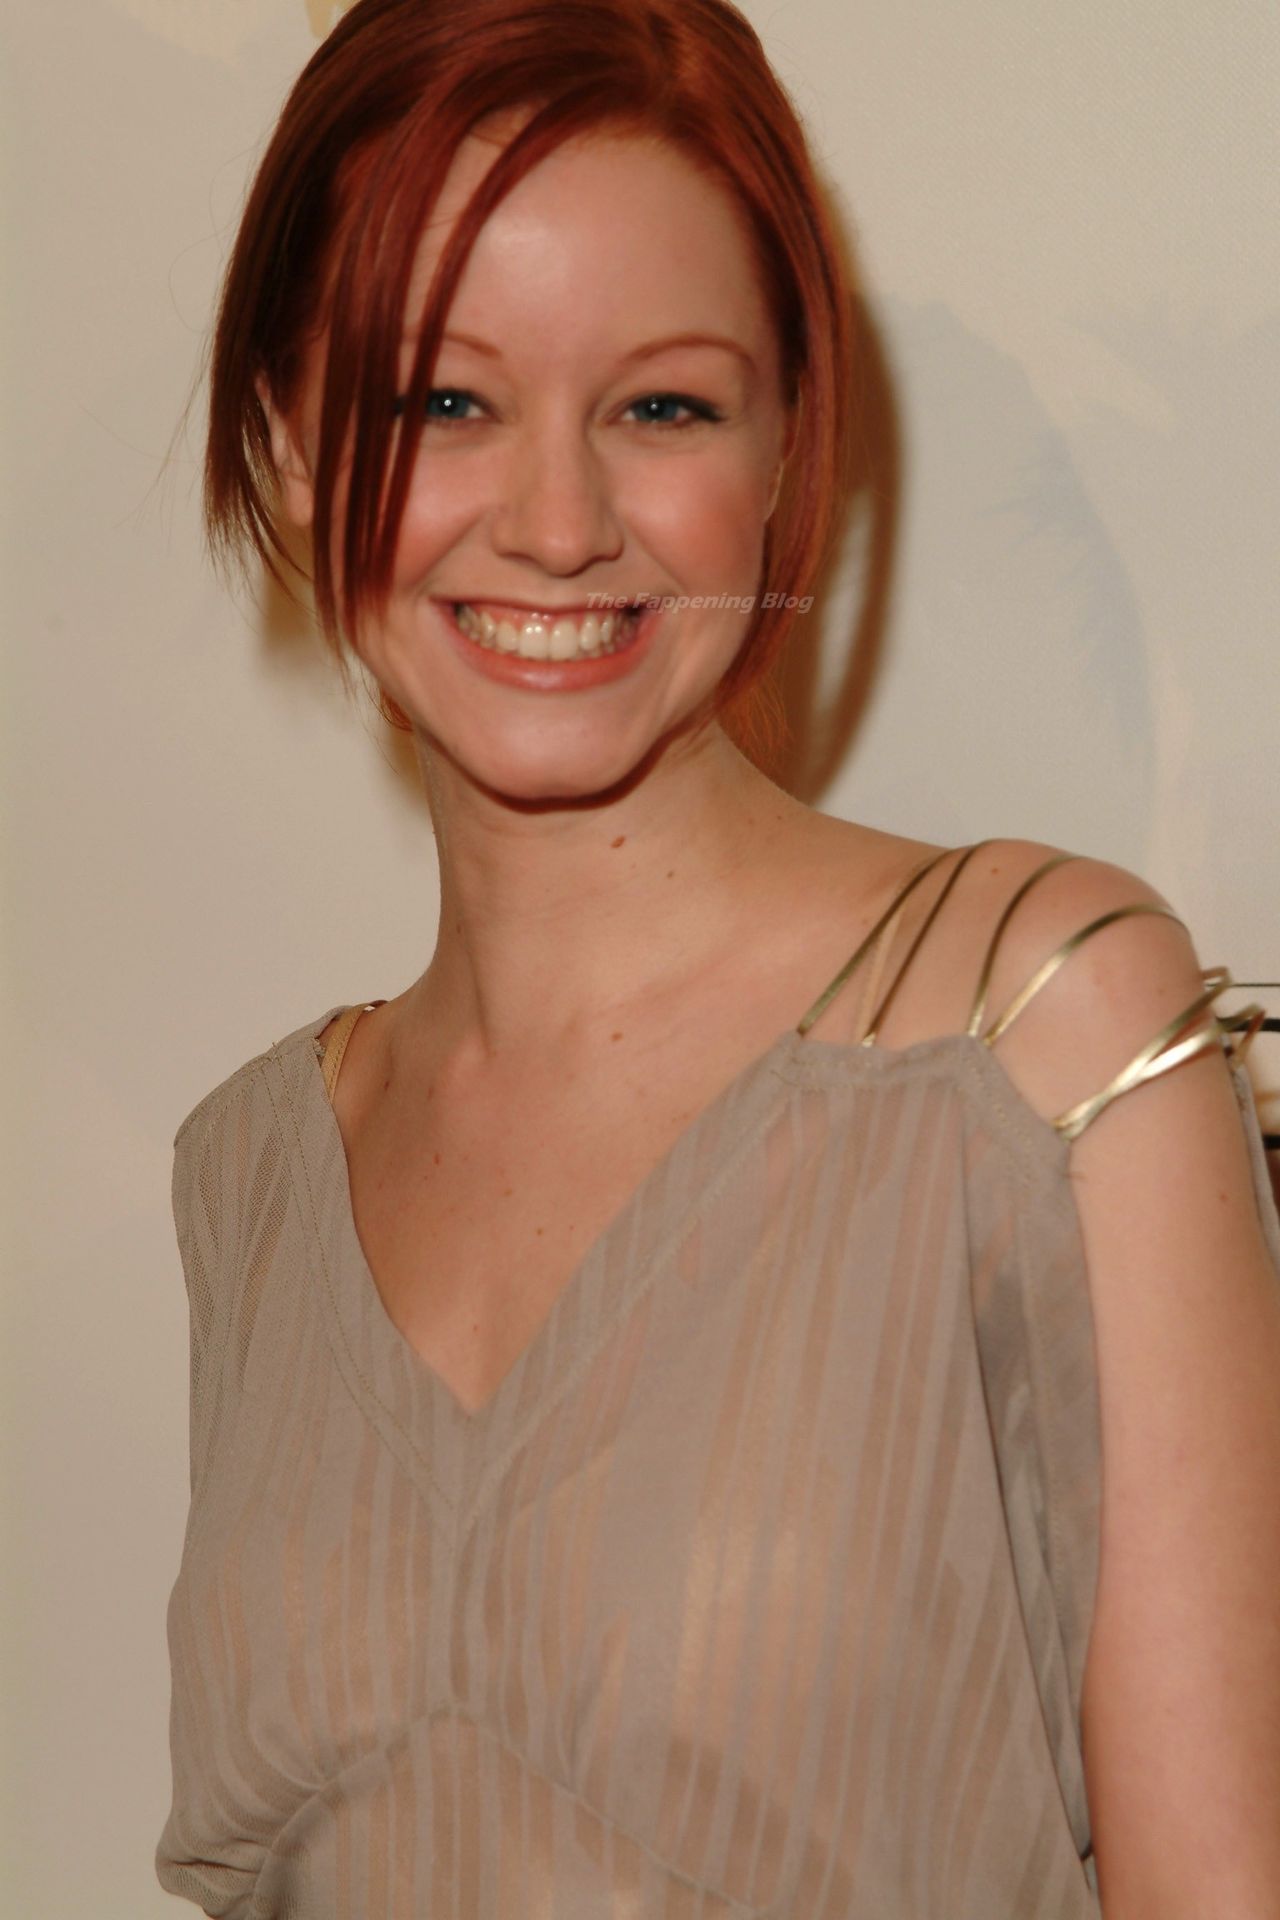 Fappening lindy booth 